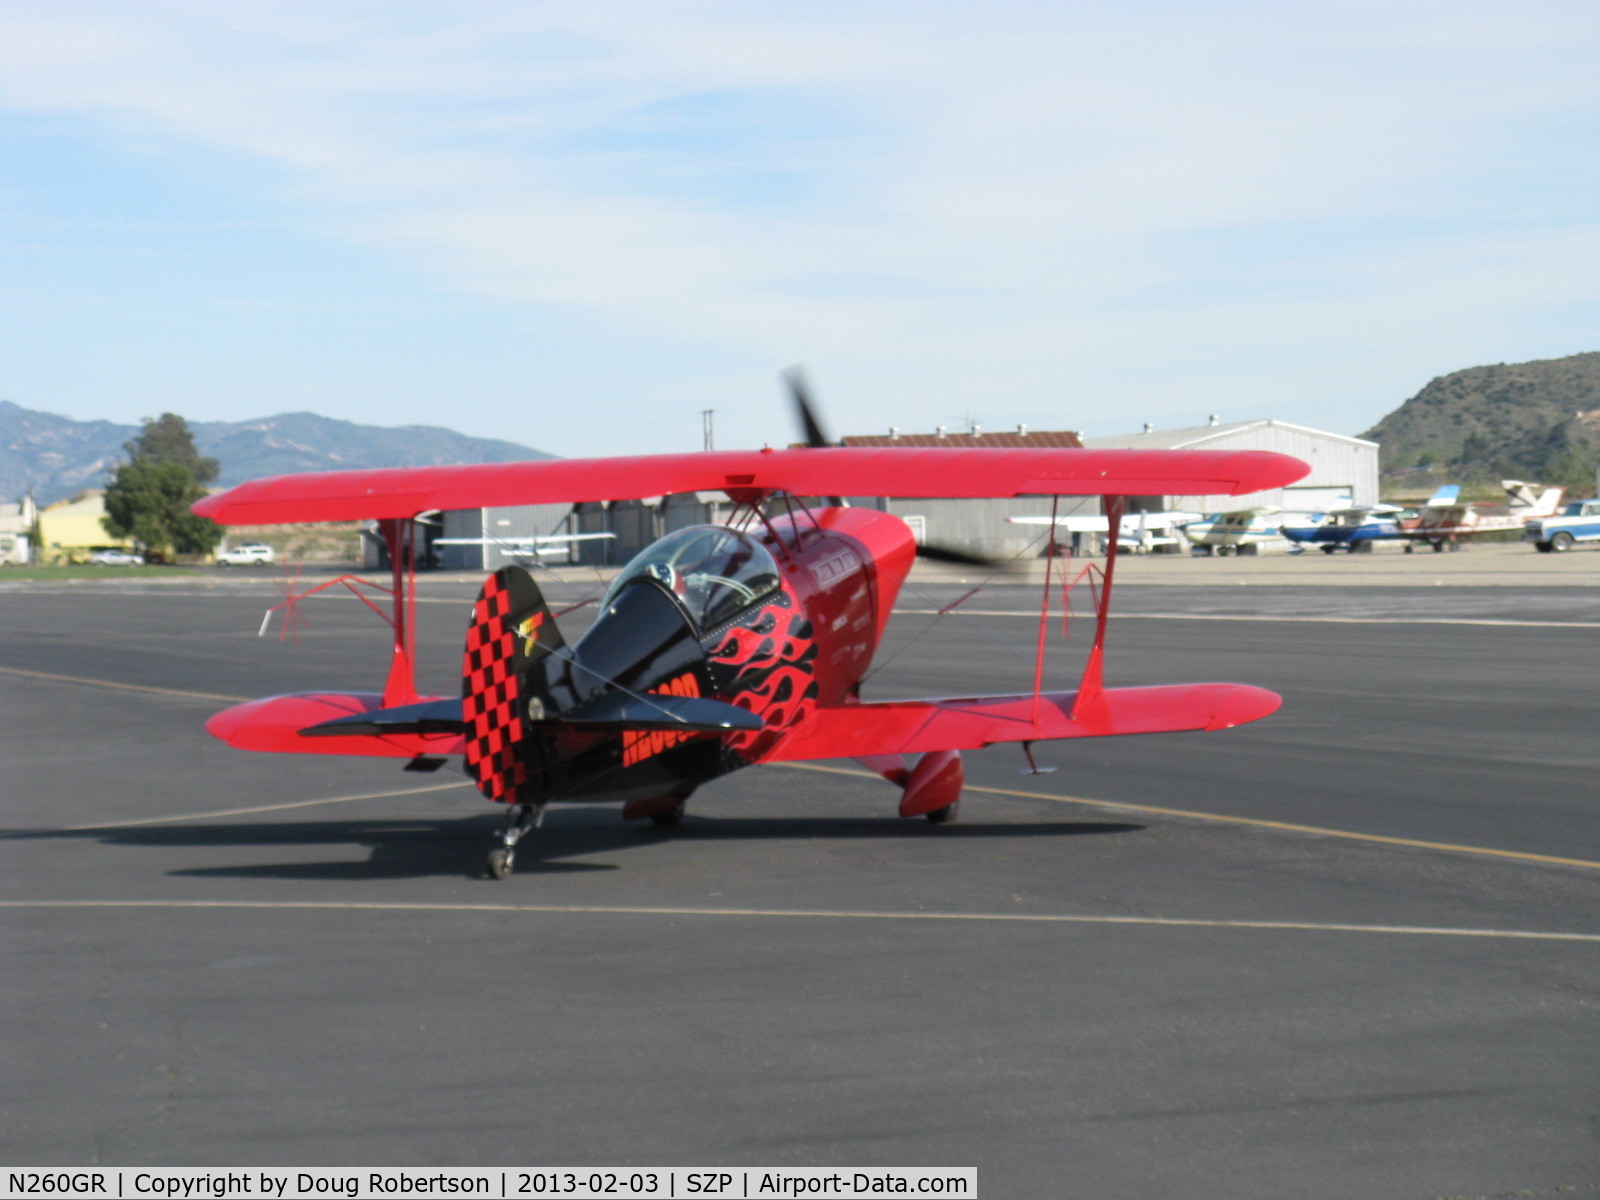 N260GR, 1984 Christen Pitts S-2B Special C/N 5059, 1984 Christen PITTS S-2B, Lycoming AEIO-540 260 Hp, engine start